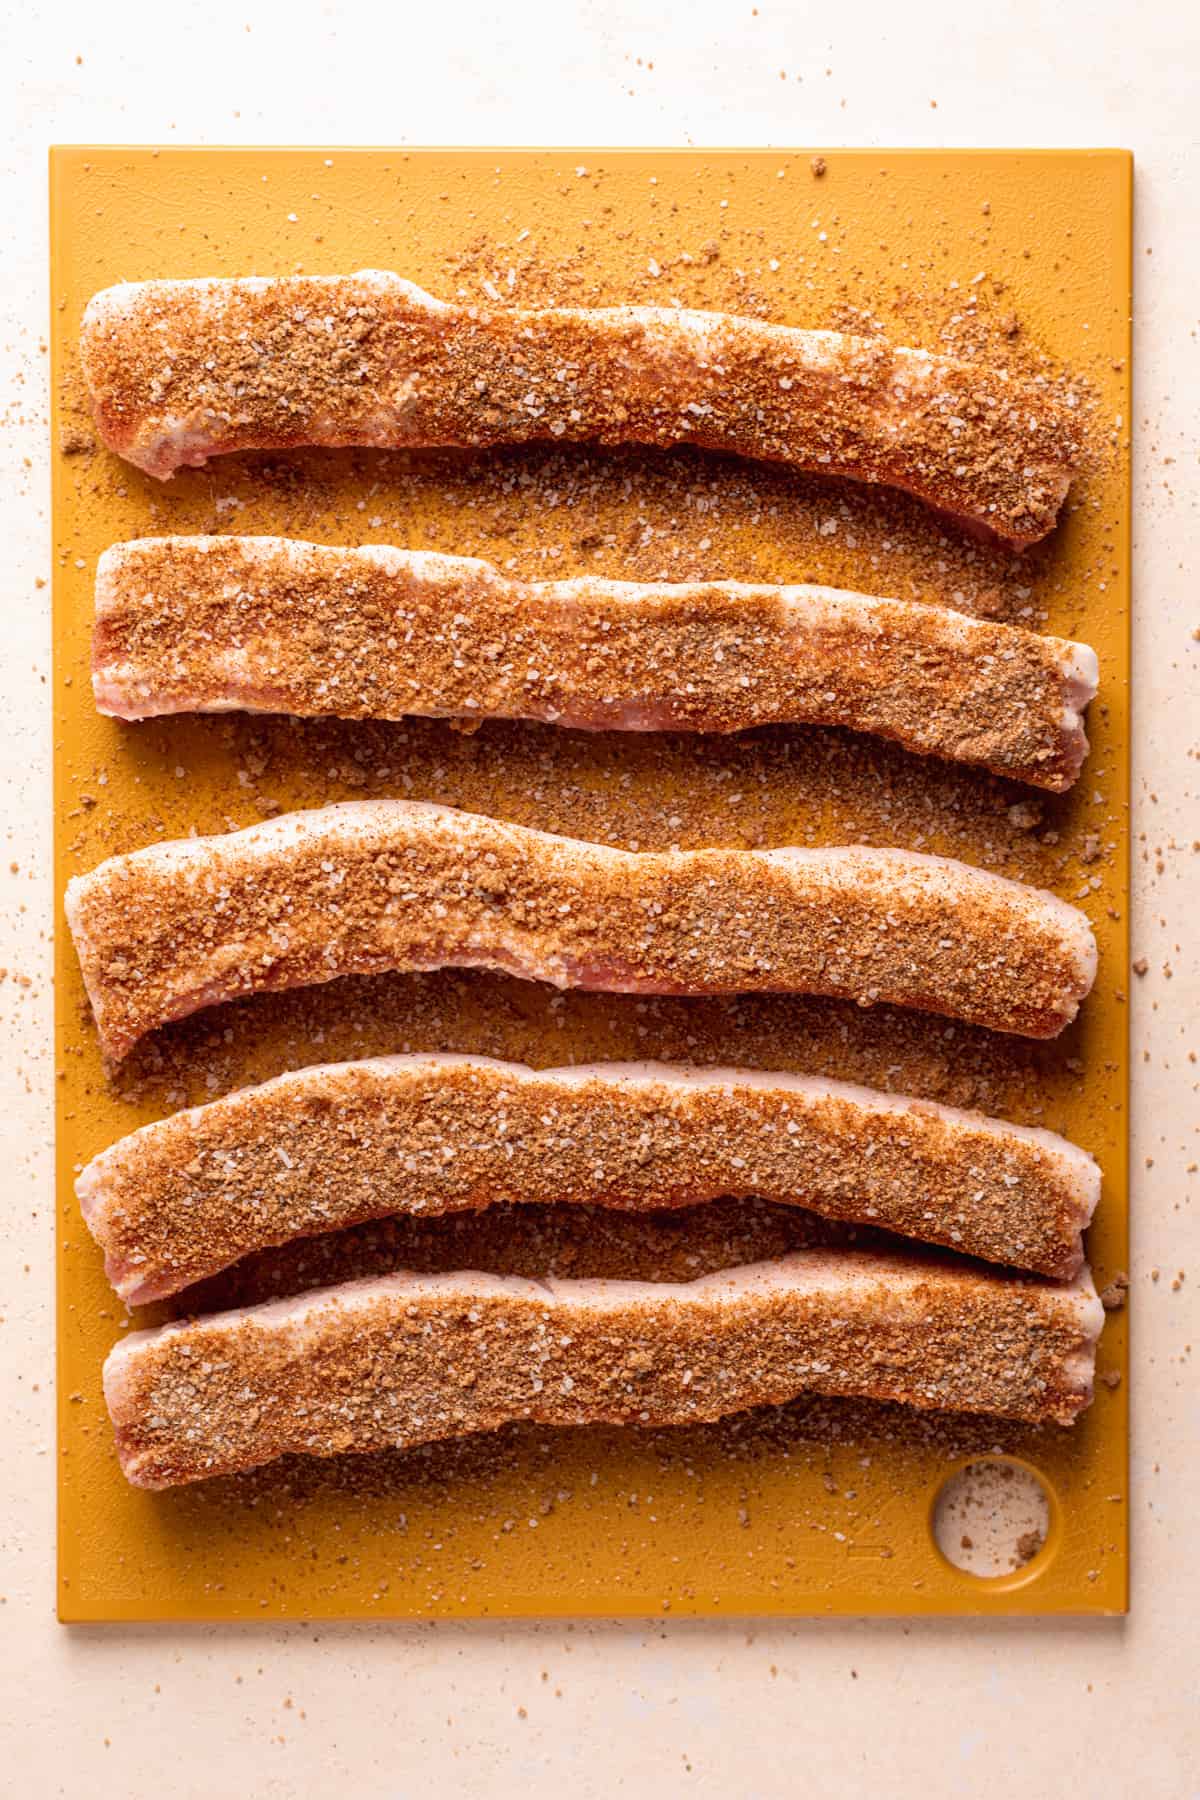 Strips of thick pork belly on a yellow cutting board sprinkled with pork dry rub.